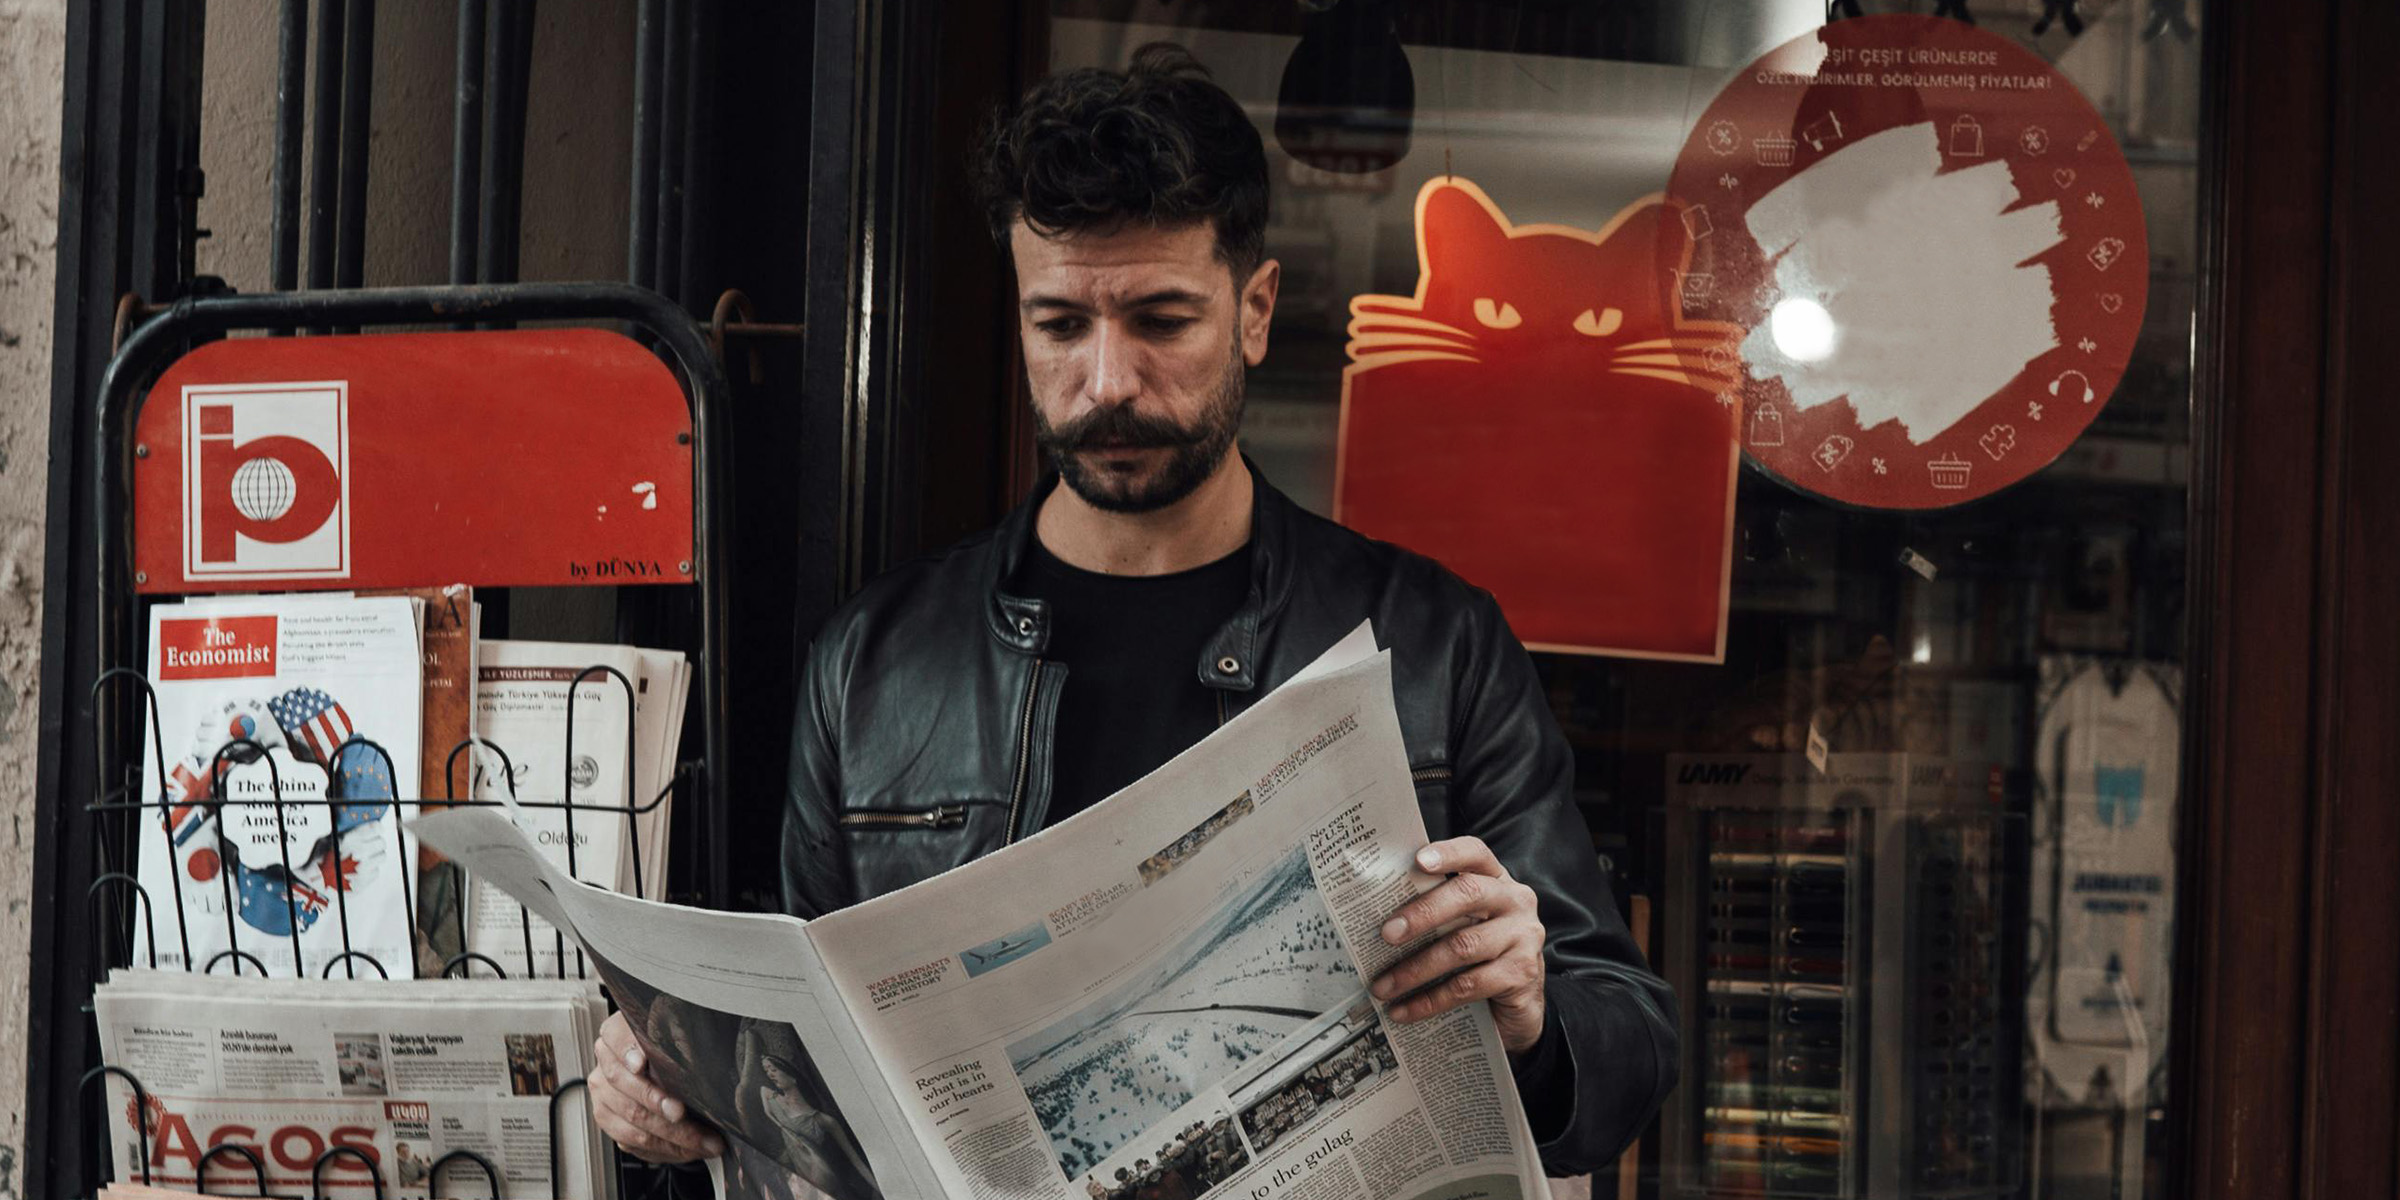 A tourist reading a newspaper by the book-store | Source: Pexels